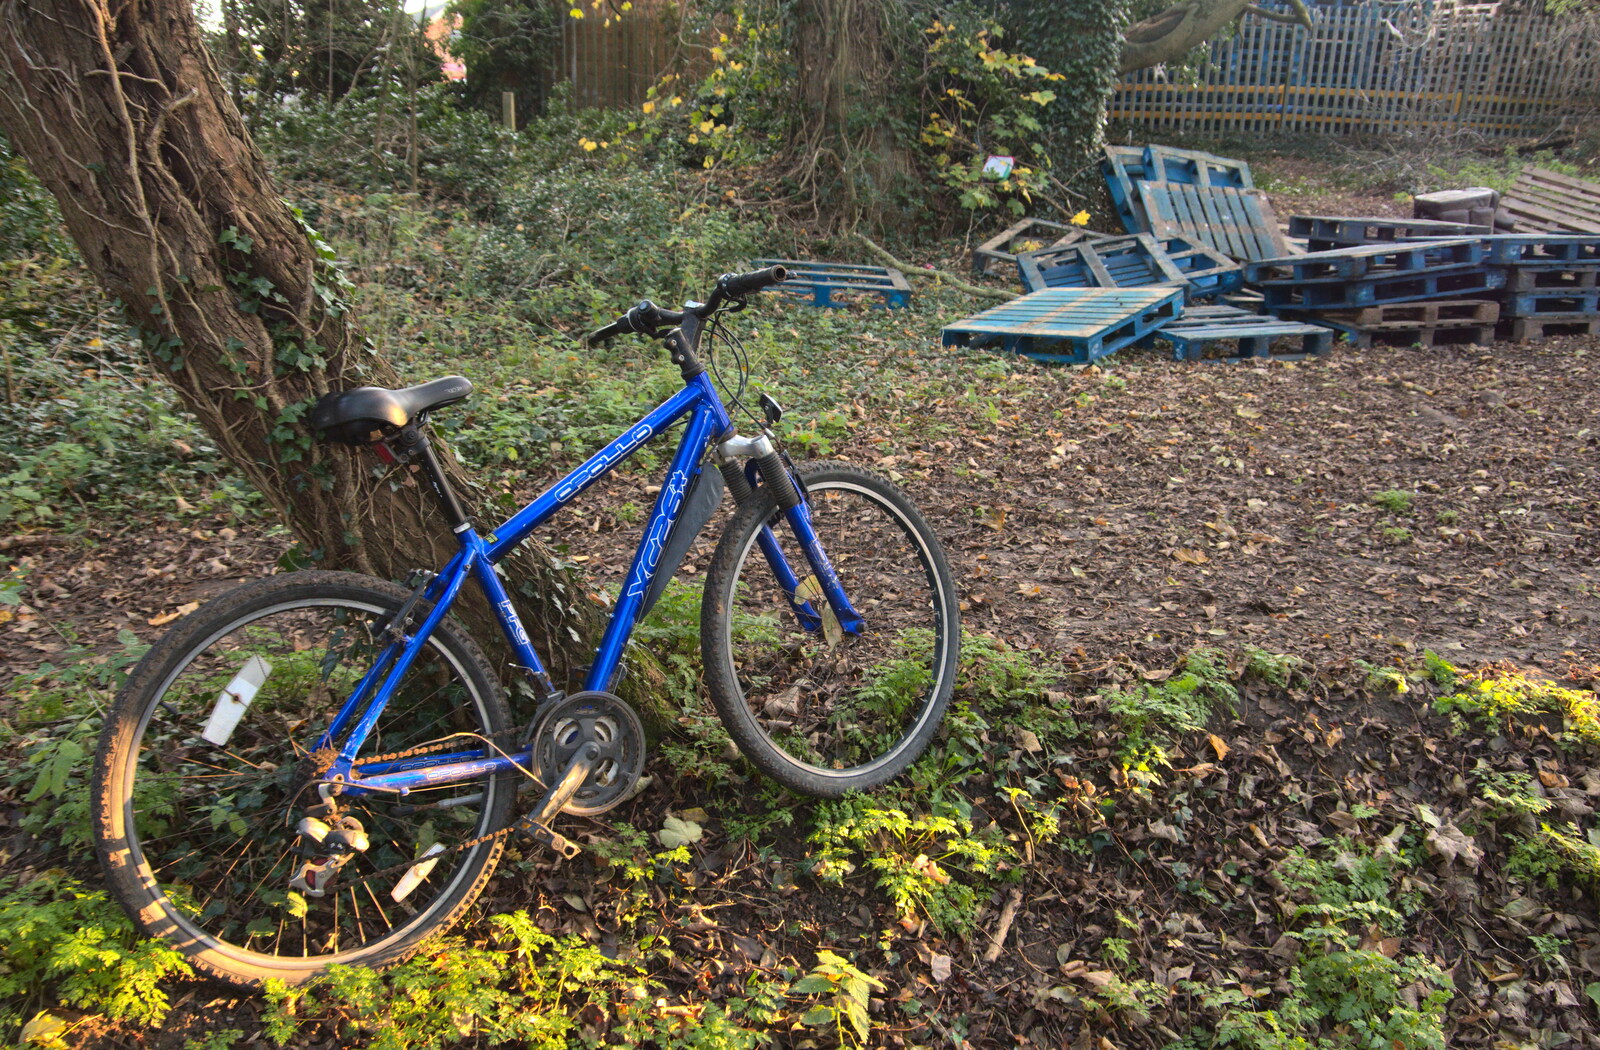 An old bike has been left in case anyone wants a go from The Dereliction of Eye, Suffolk - 22nd November 2020